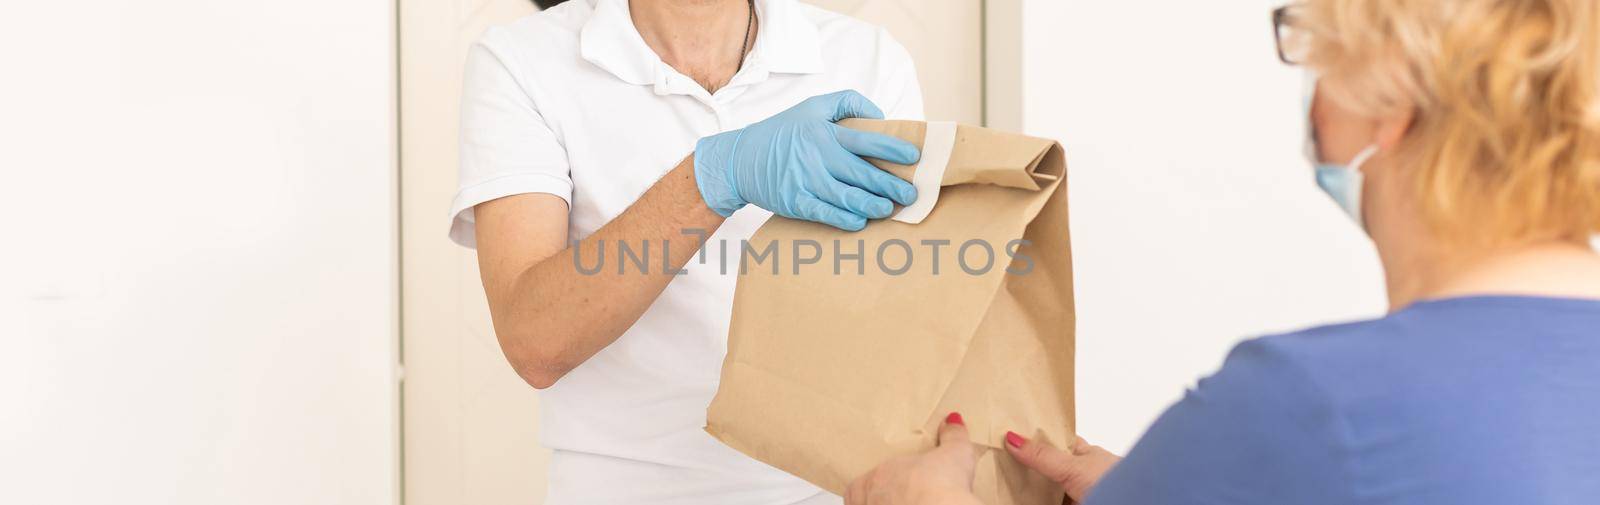 Food delivery to an elderly woman during quarantine Coronavirus Covid-19 epidemic.